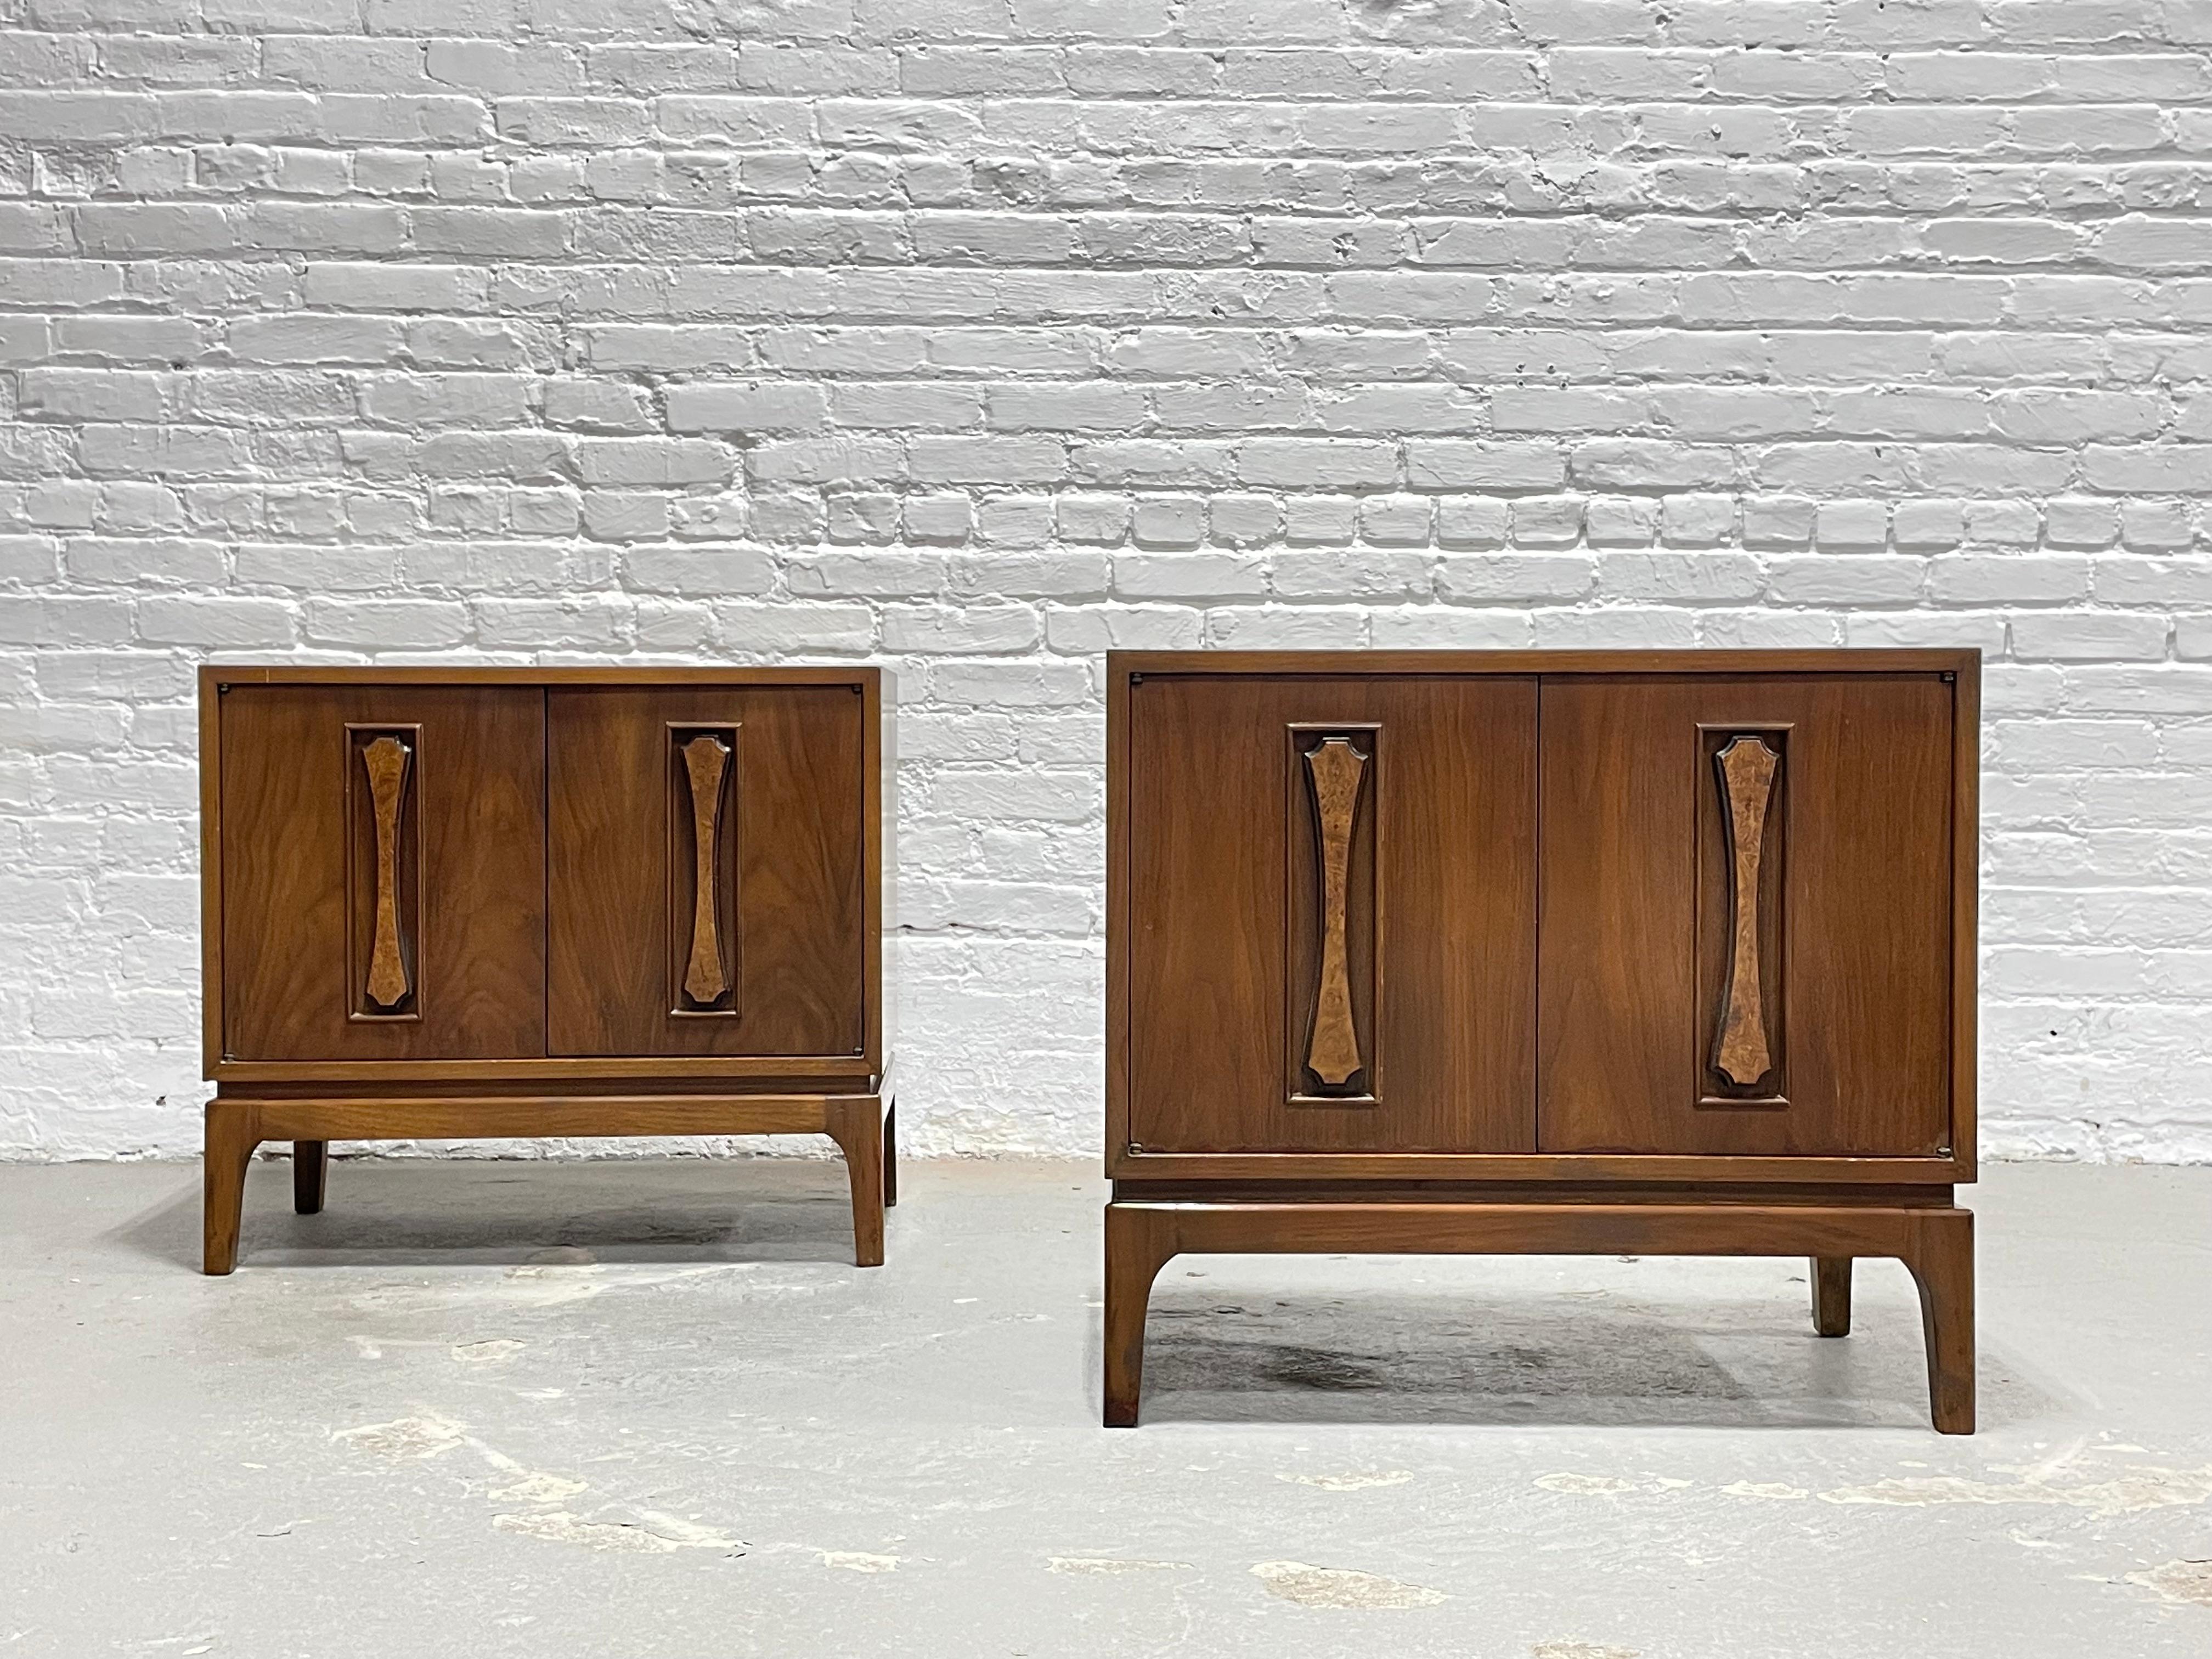 Pair of Mid-Century Modern Burlwood Walnut Nightstands, circa 1960s. These gorgeous bedside tables feature sculpted burlwood inserts, solid construction and a single wide shelf in each cabinet. Lovely vintage condition with wear from age and use